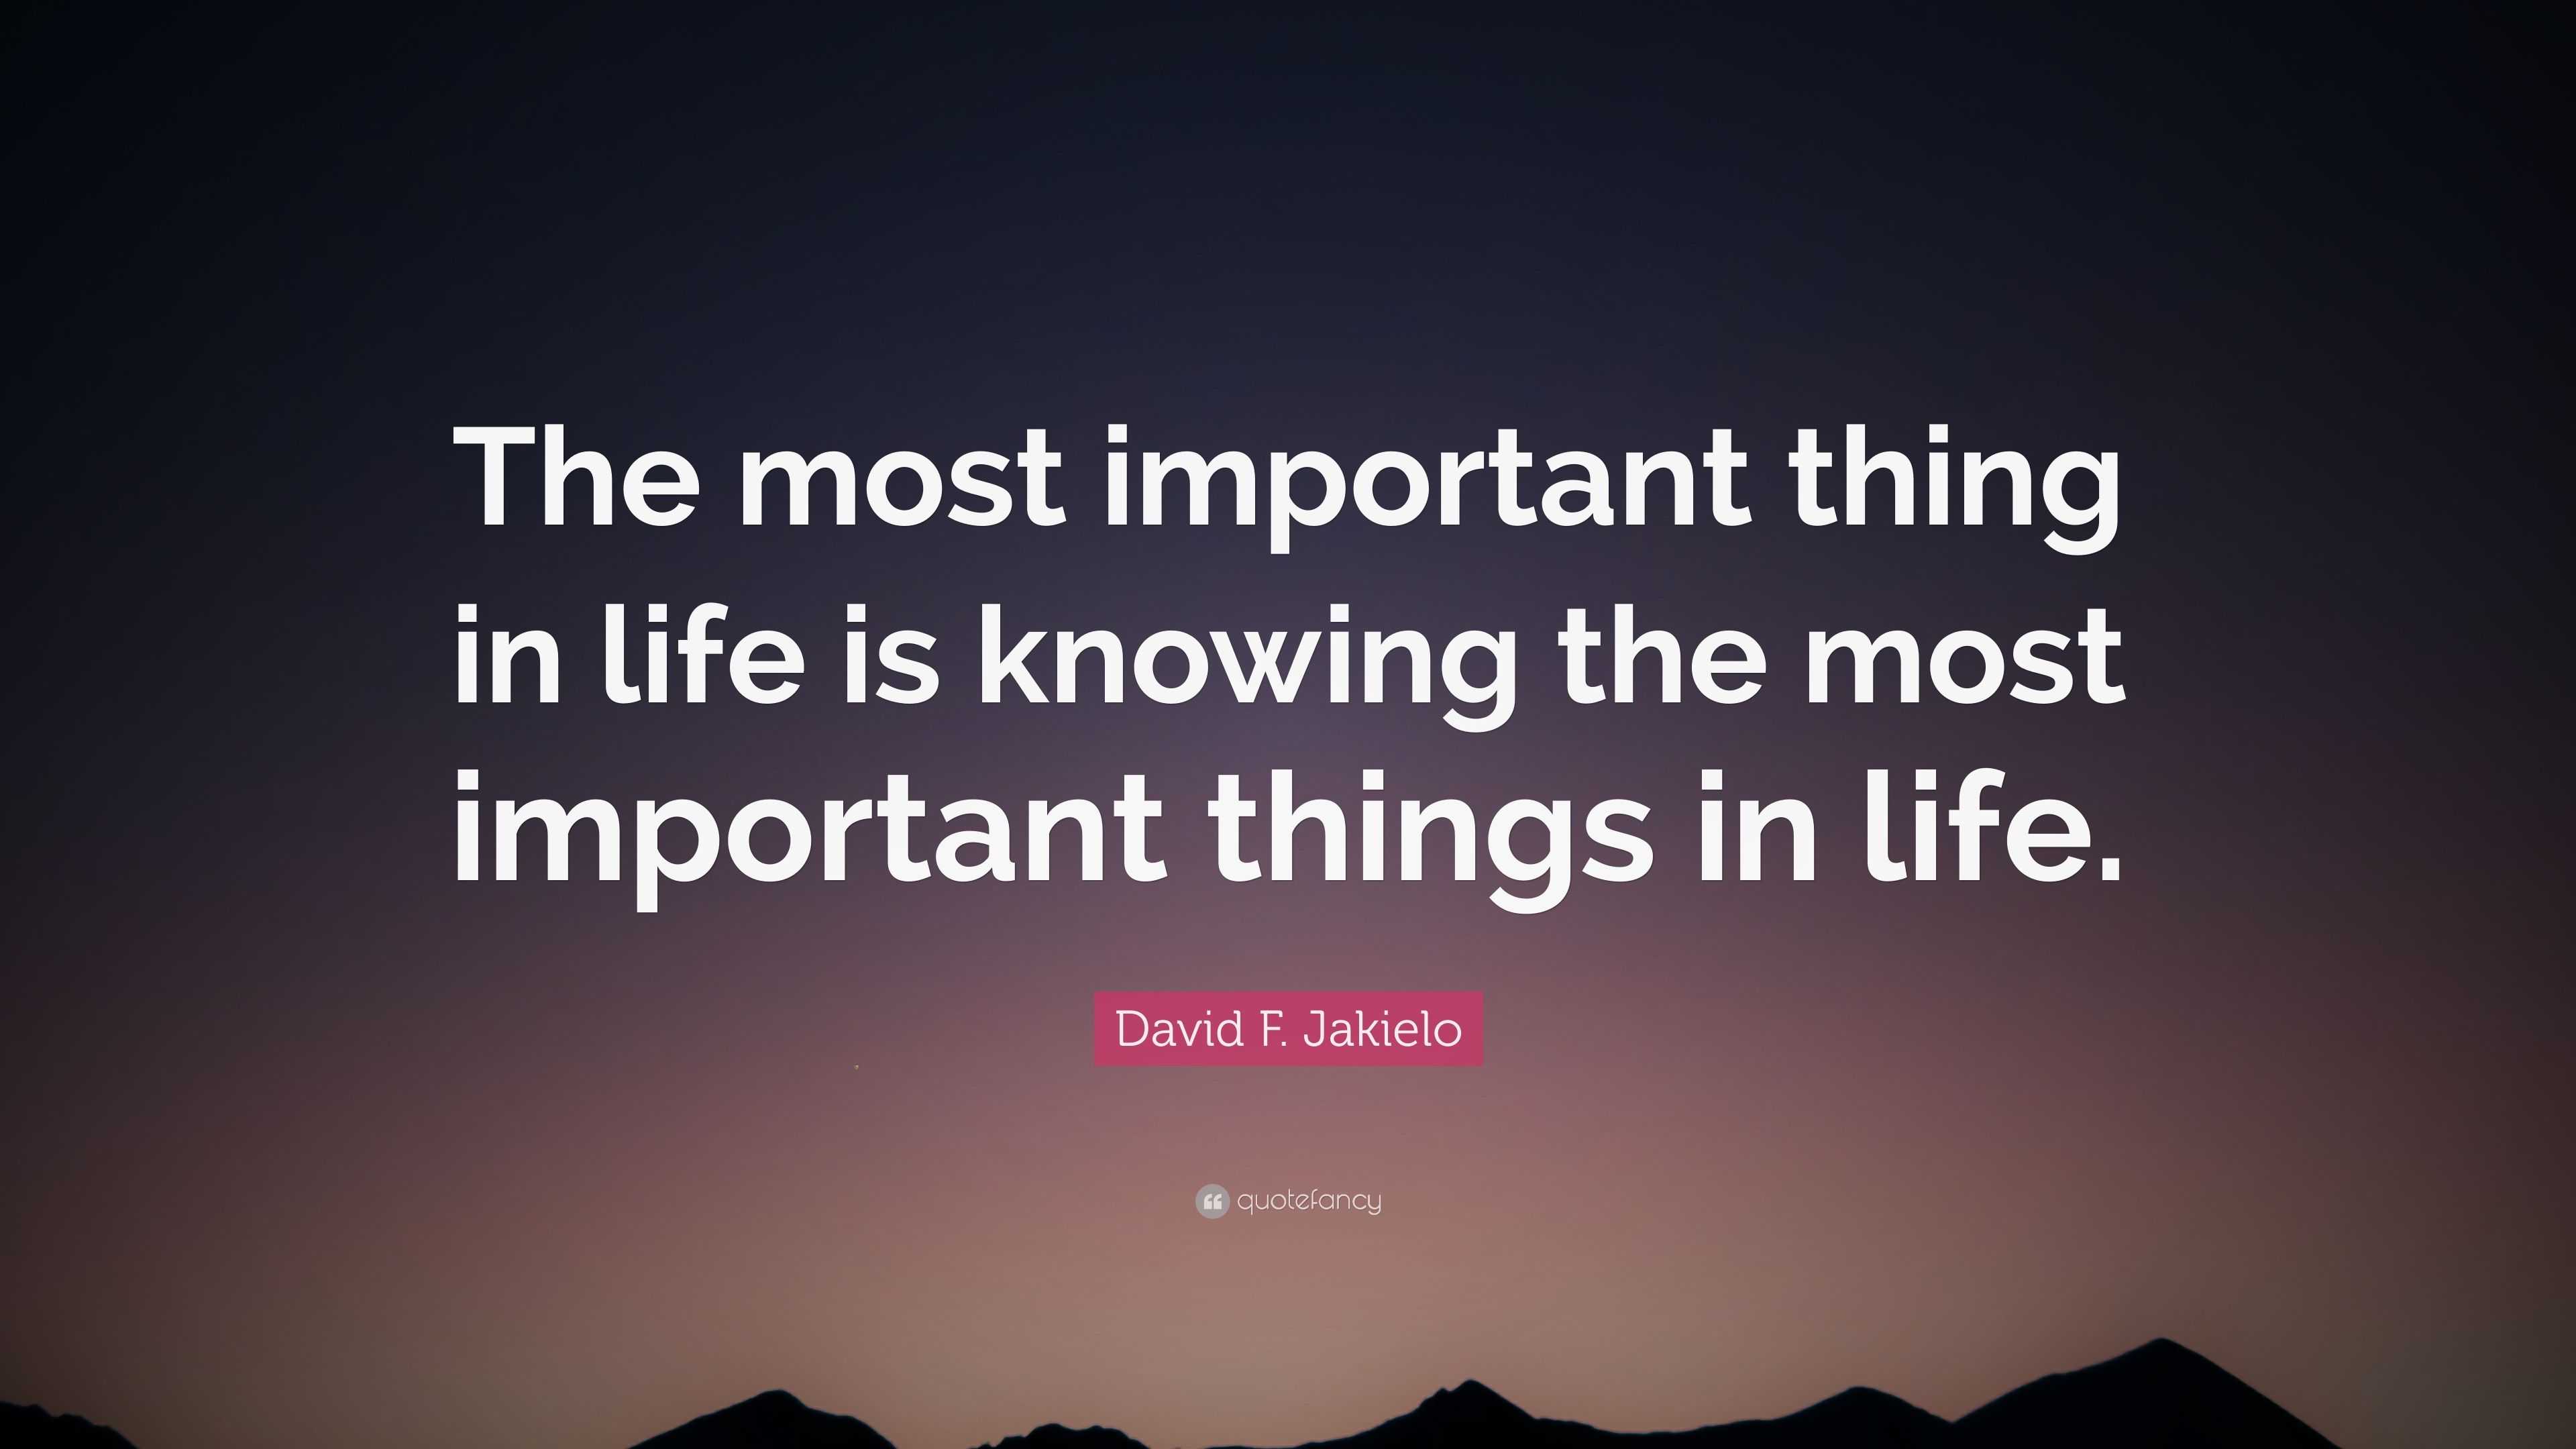 David F Jakielo Quote The Most Important Thing In Life Is Knowing The Most Important Things